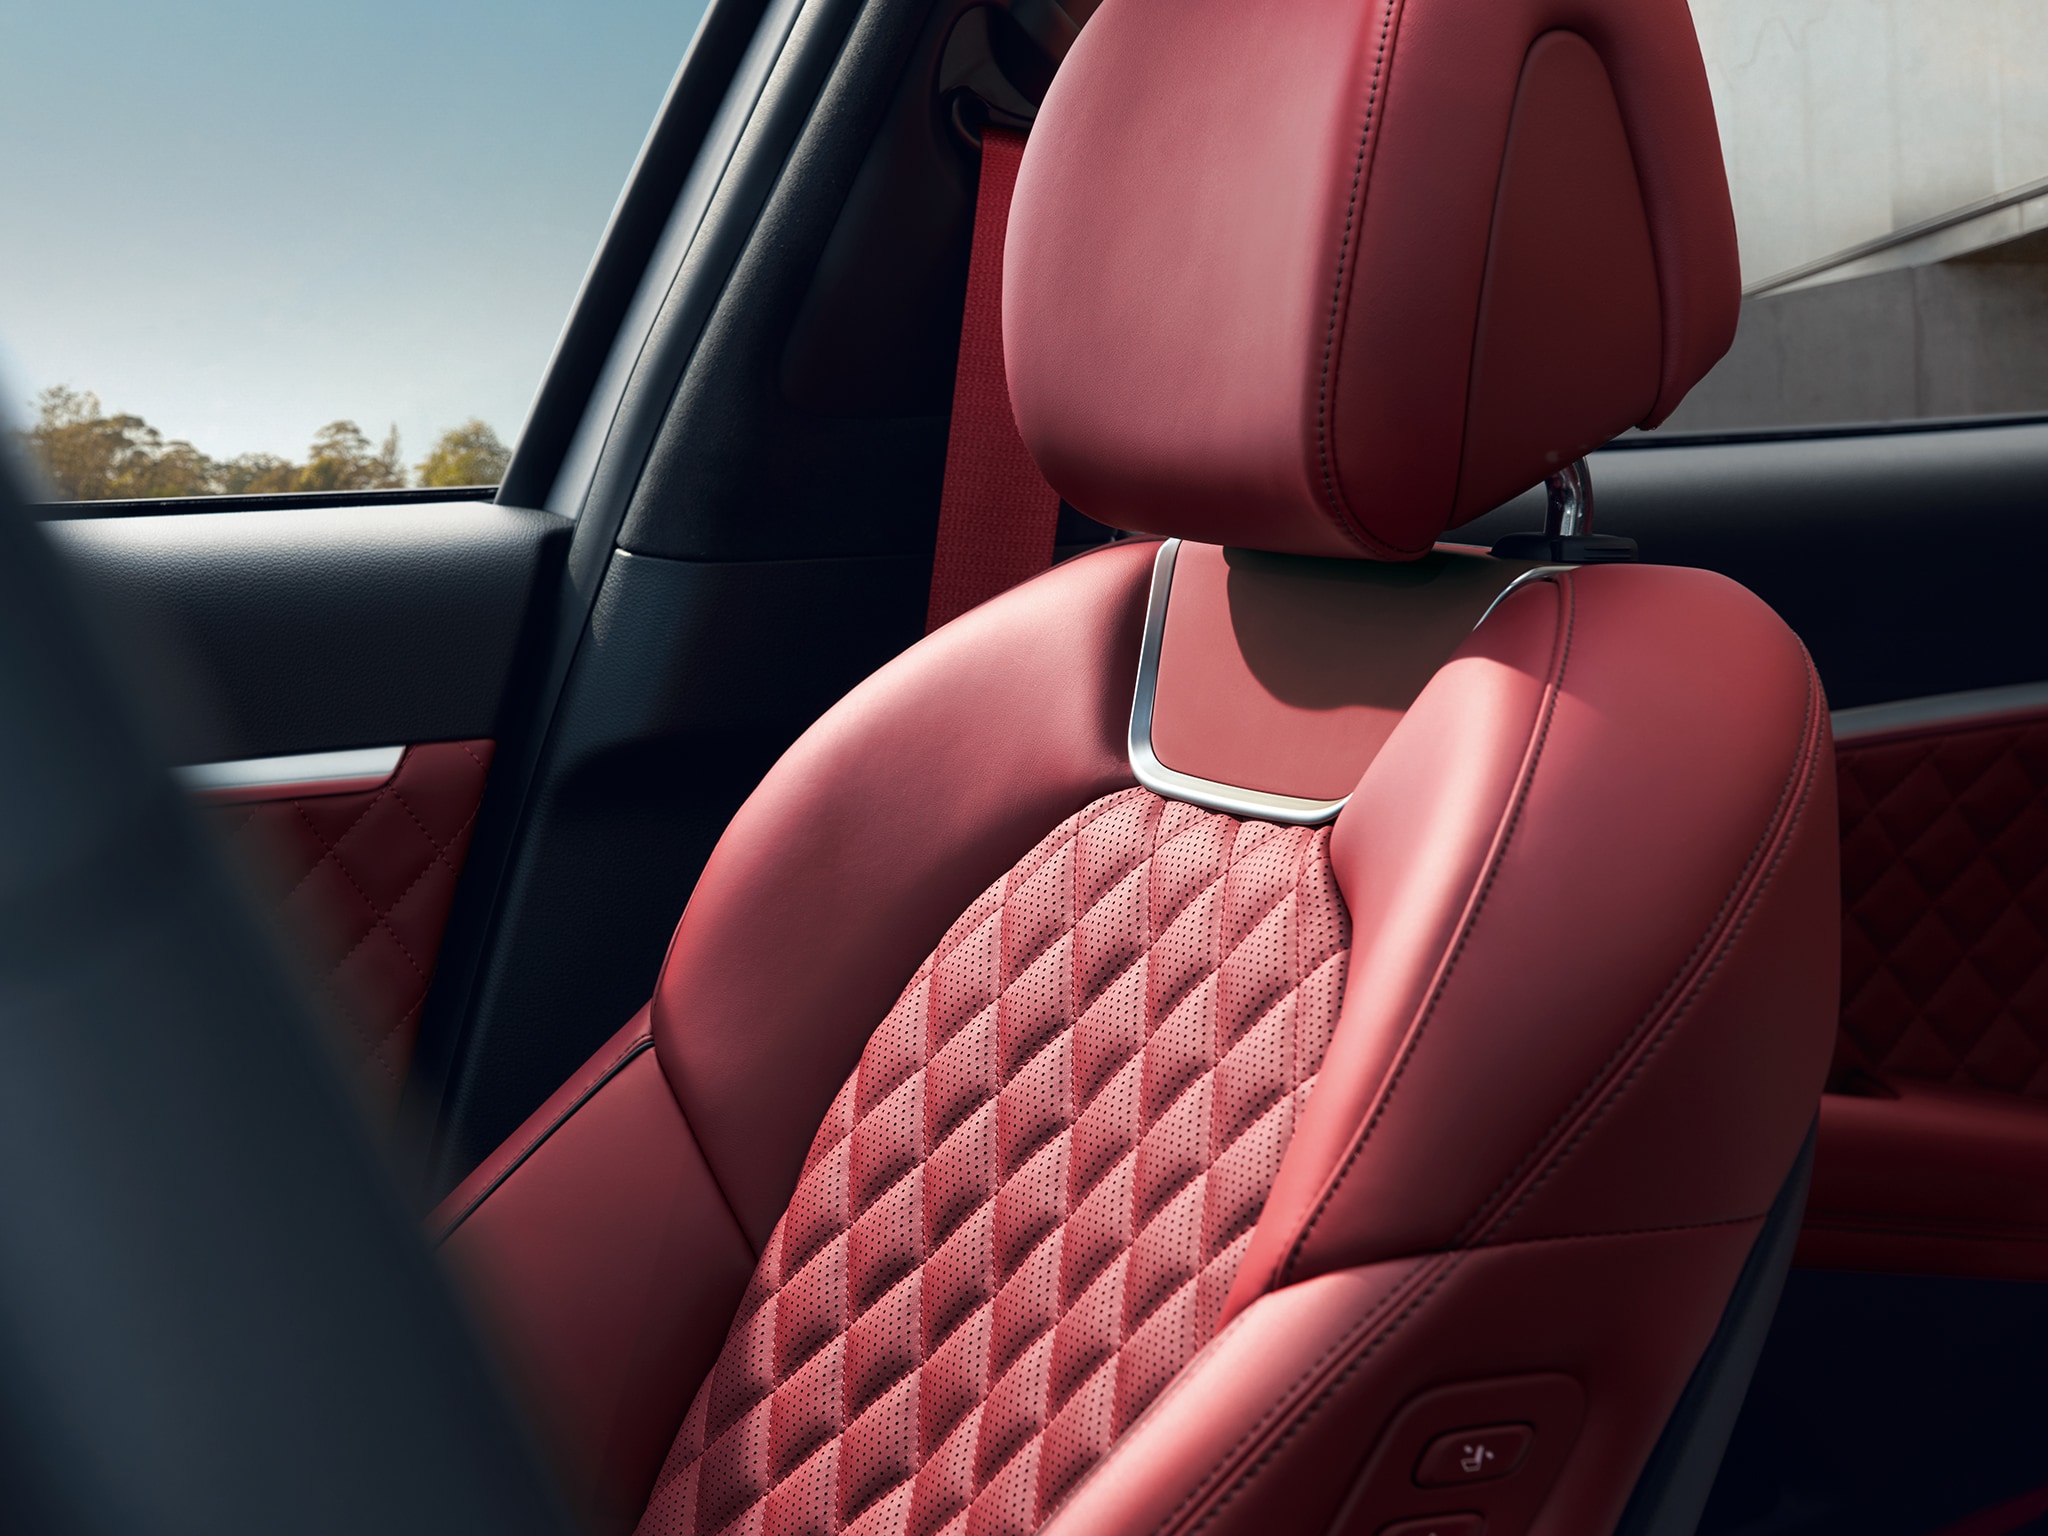 2022 Genesis G70 diamond quilted leather sport seats.